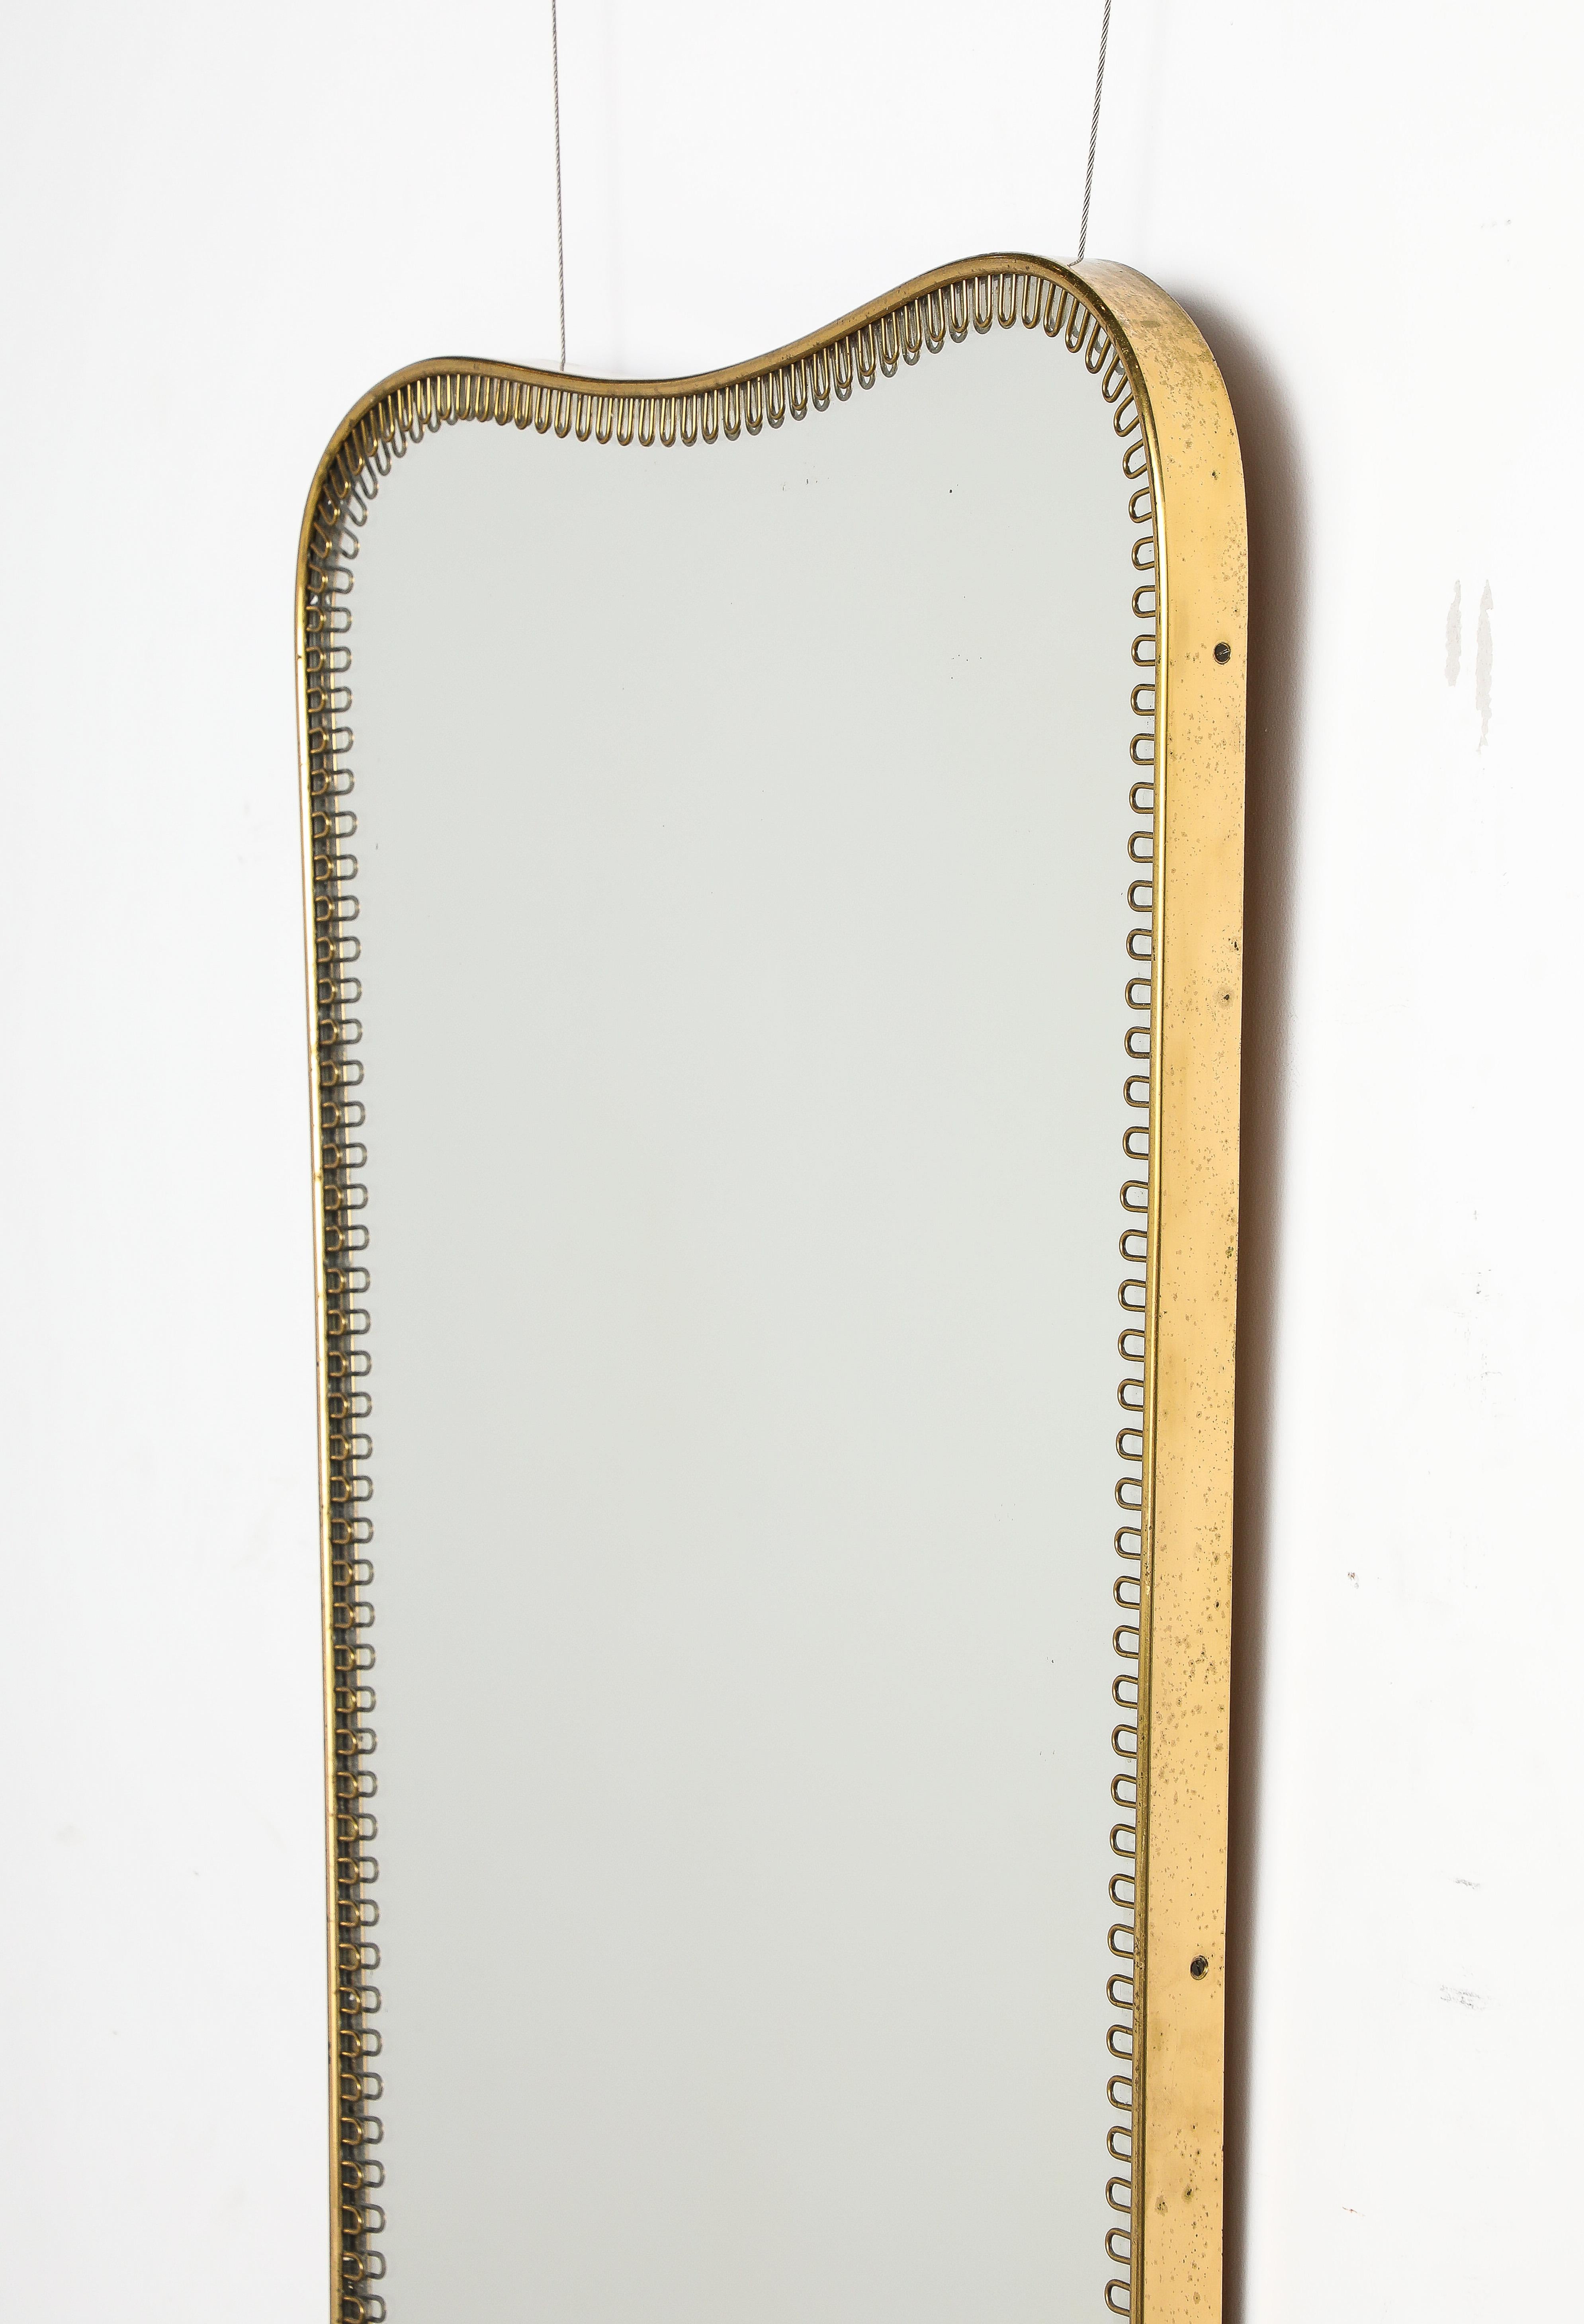 Mid-20th Century Gio Ponti Attributed Italian Modernist Brass Framed Mirror, Italy, circa 1940 For Sale